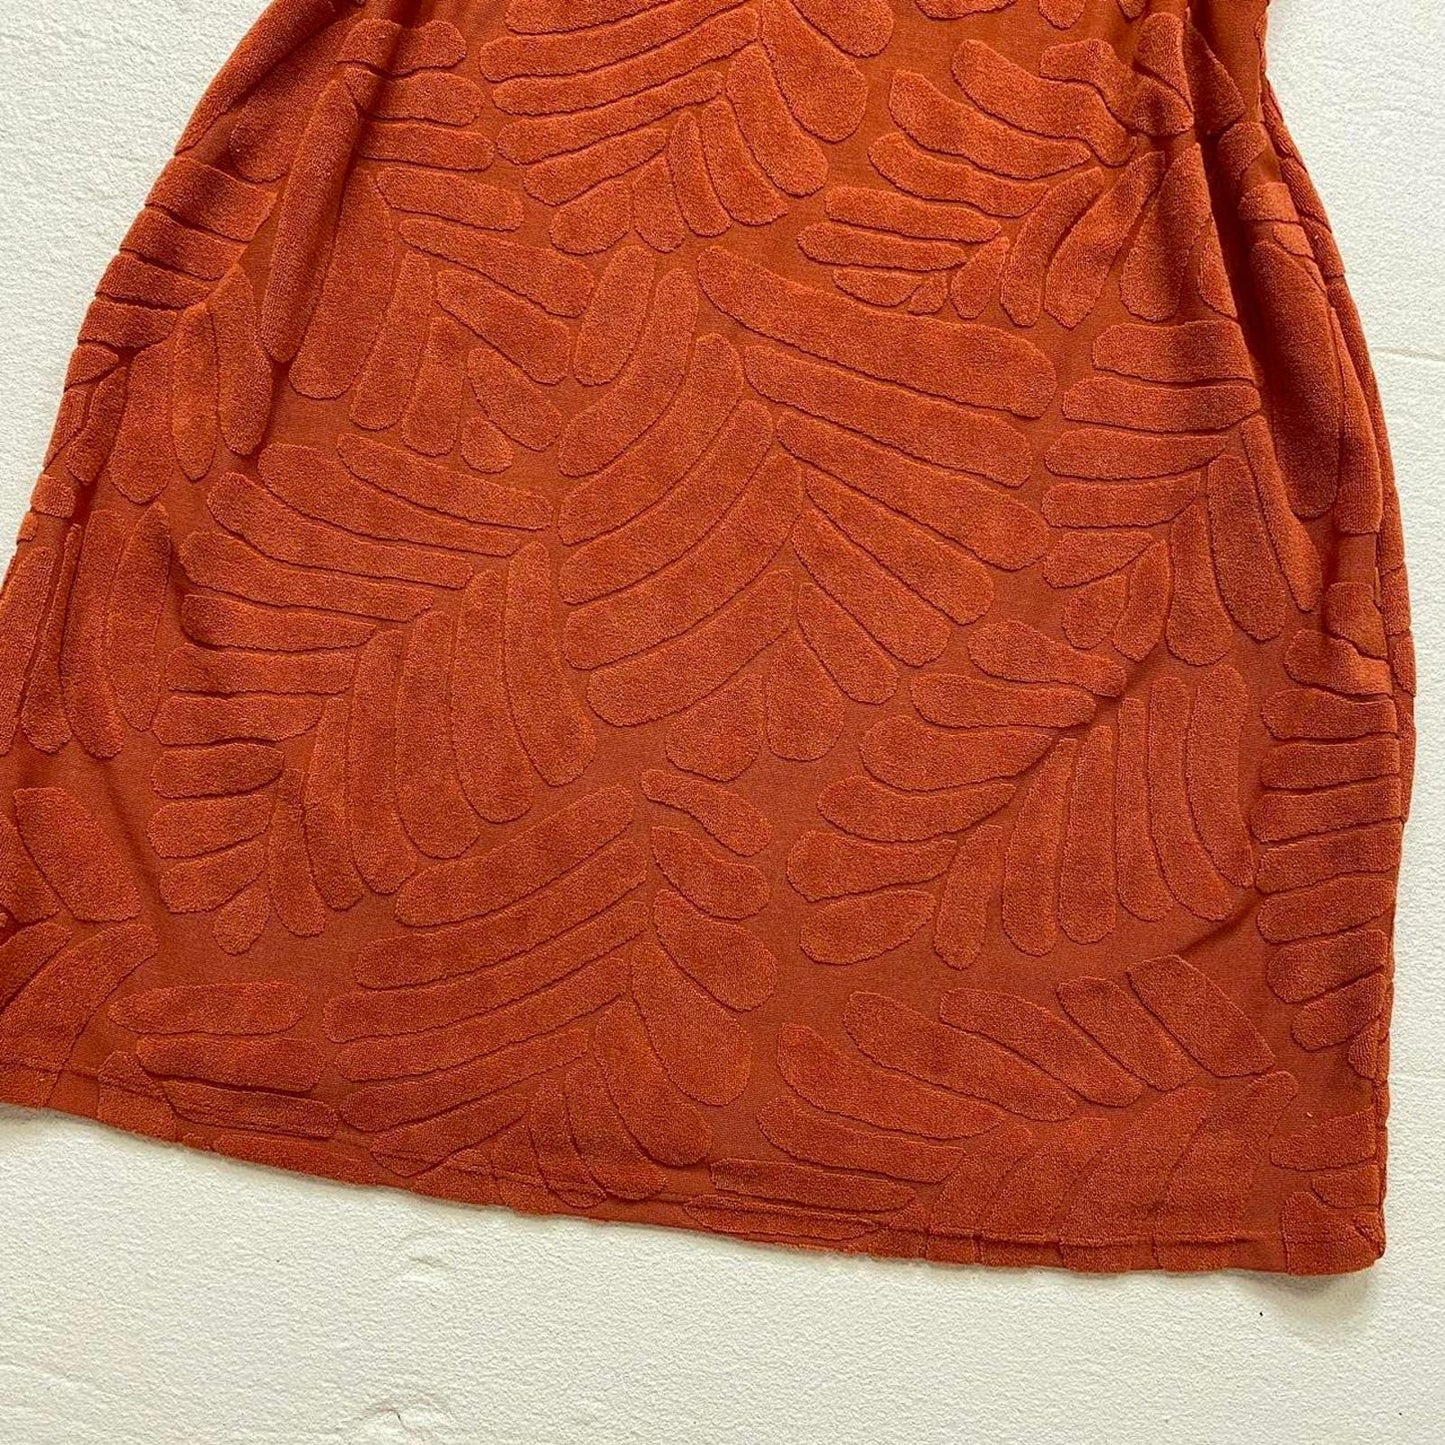 Secondhand Abound Rusty Orange Embossed Terry Mini Dress, Size XL